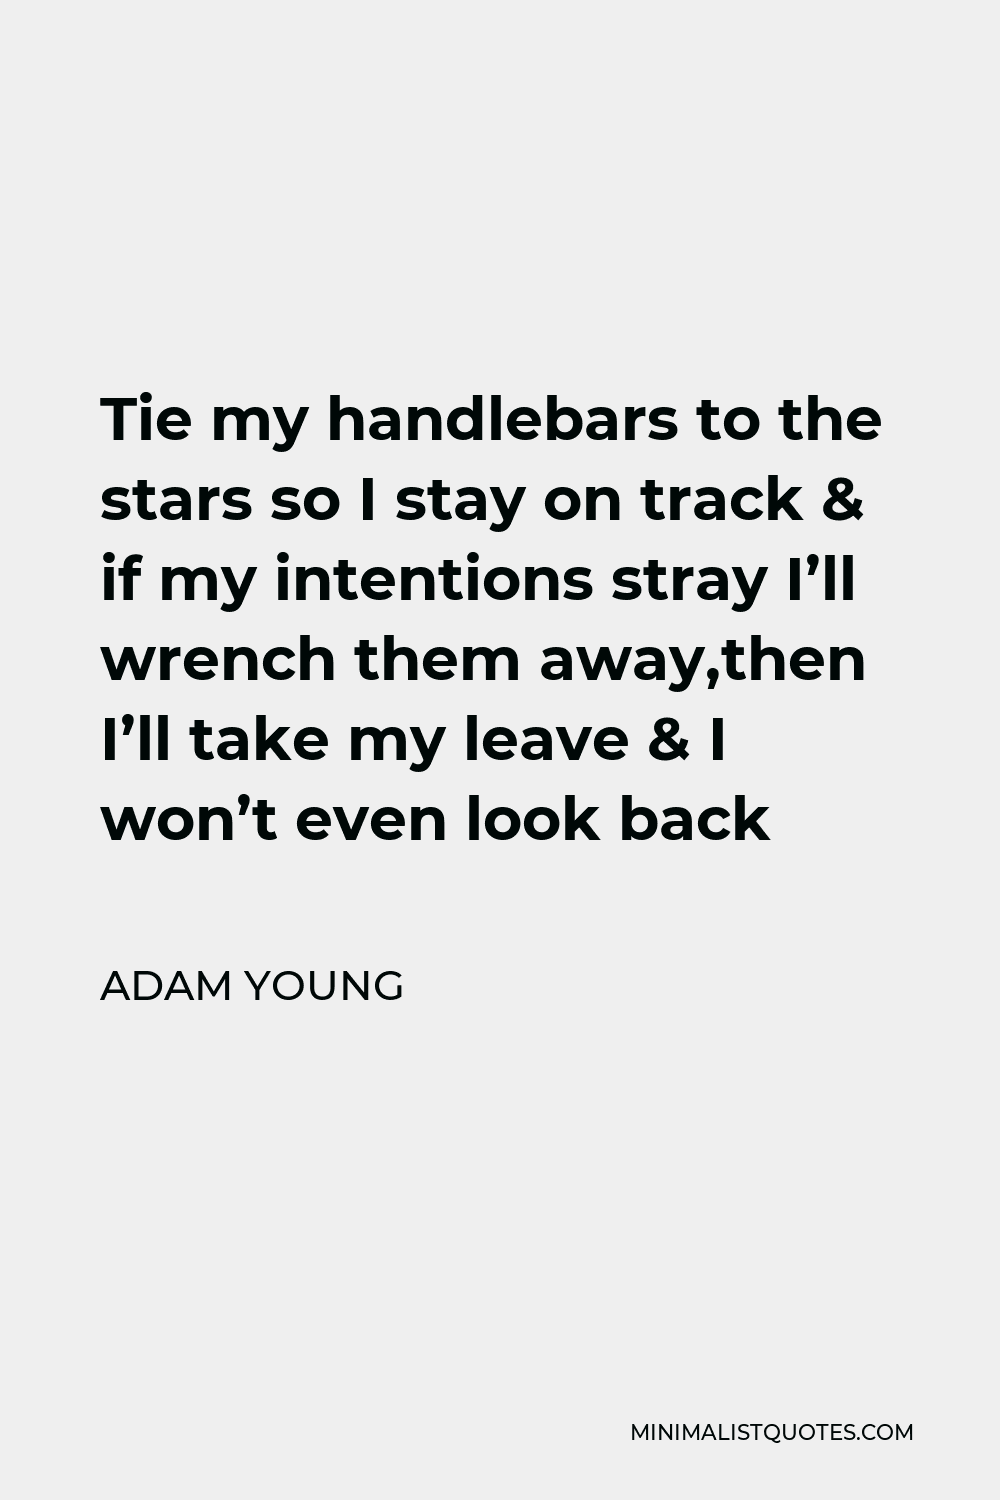 Adam Young Quote - Tie my handlebars to the stars so I stay on track & if my intentions stray I’ll wrench them away,then I’ll take my leave & I won’t even look back